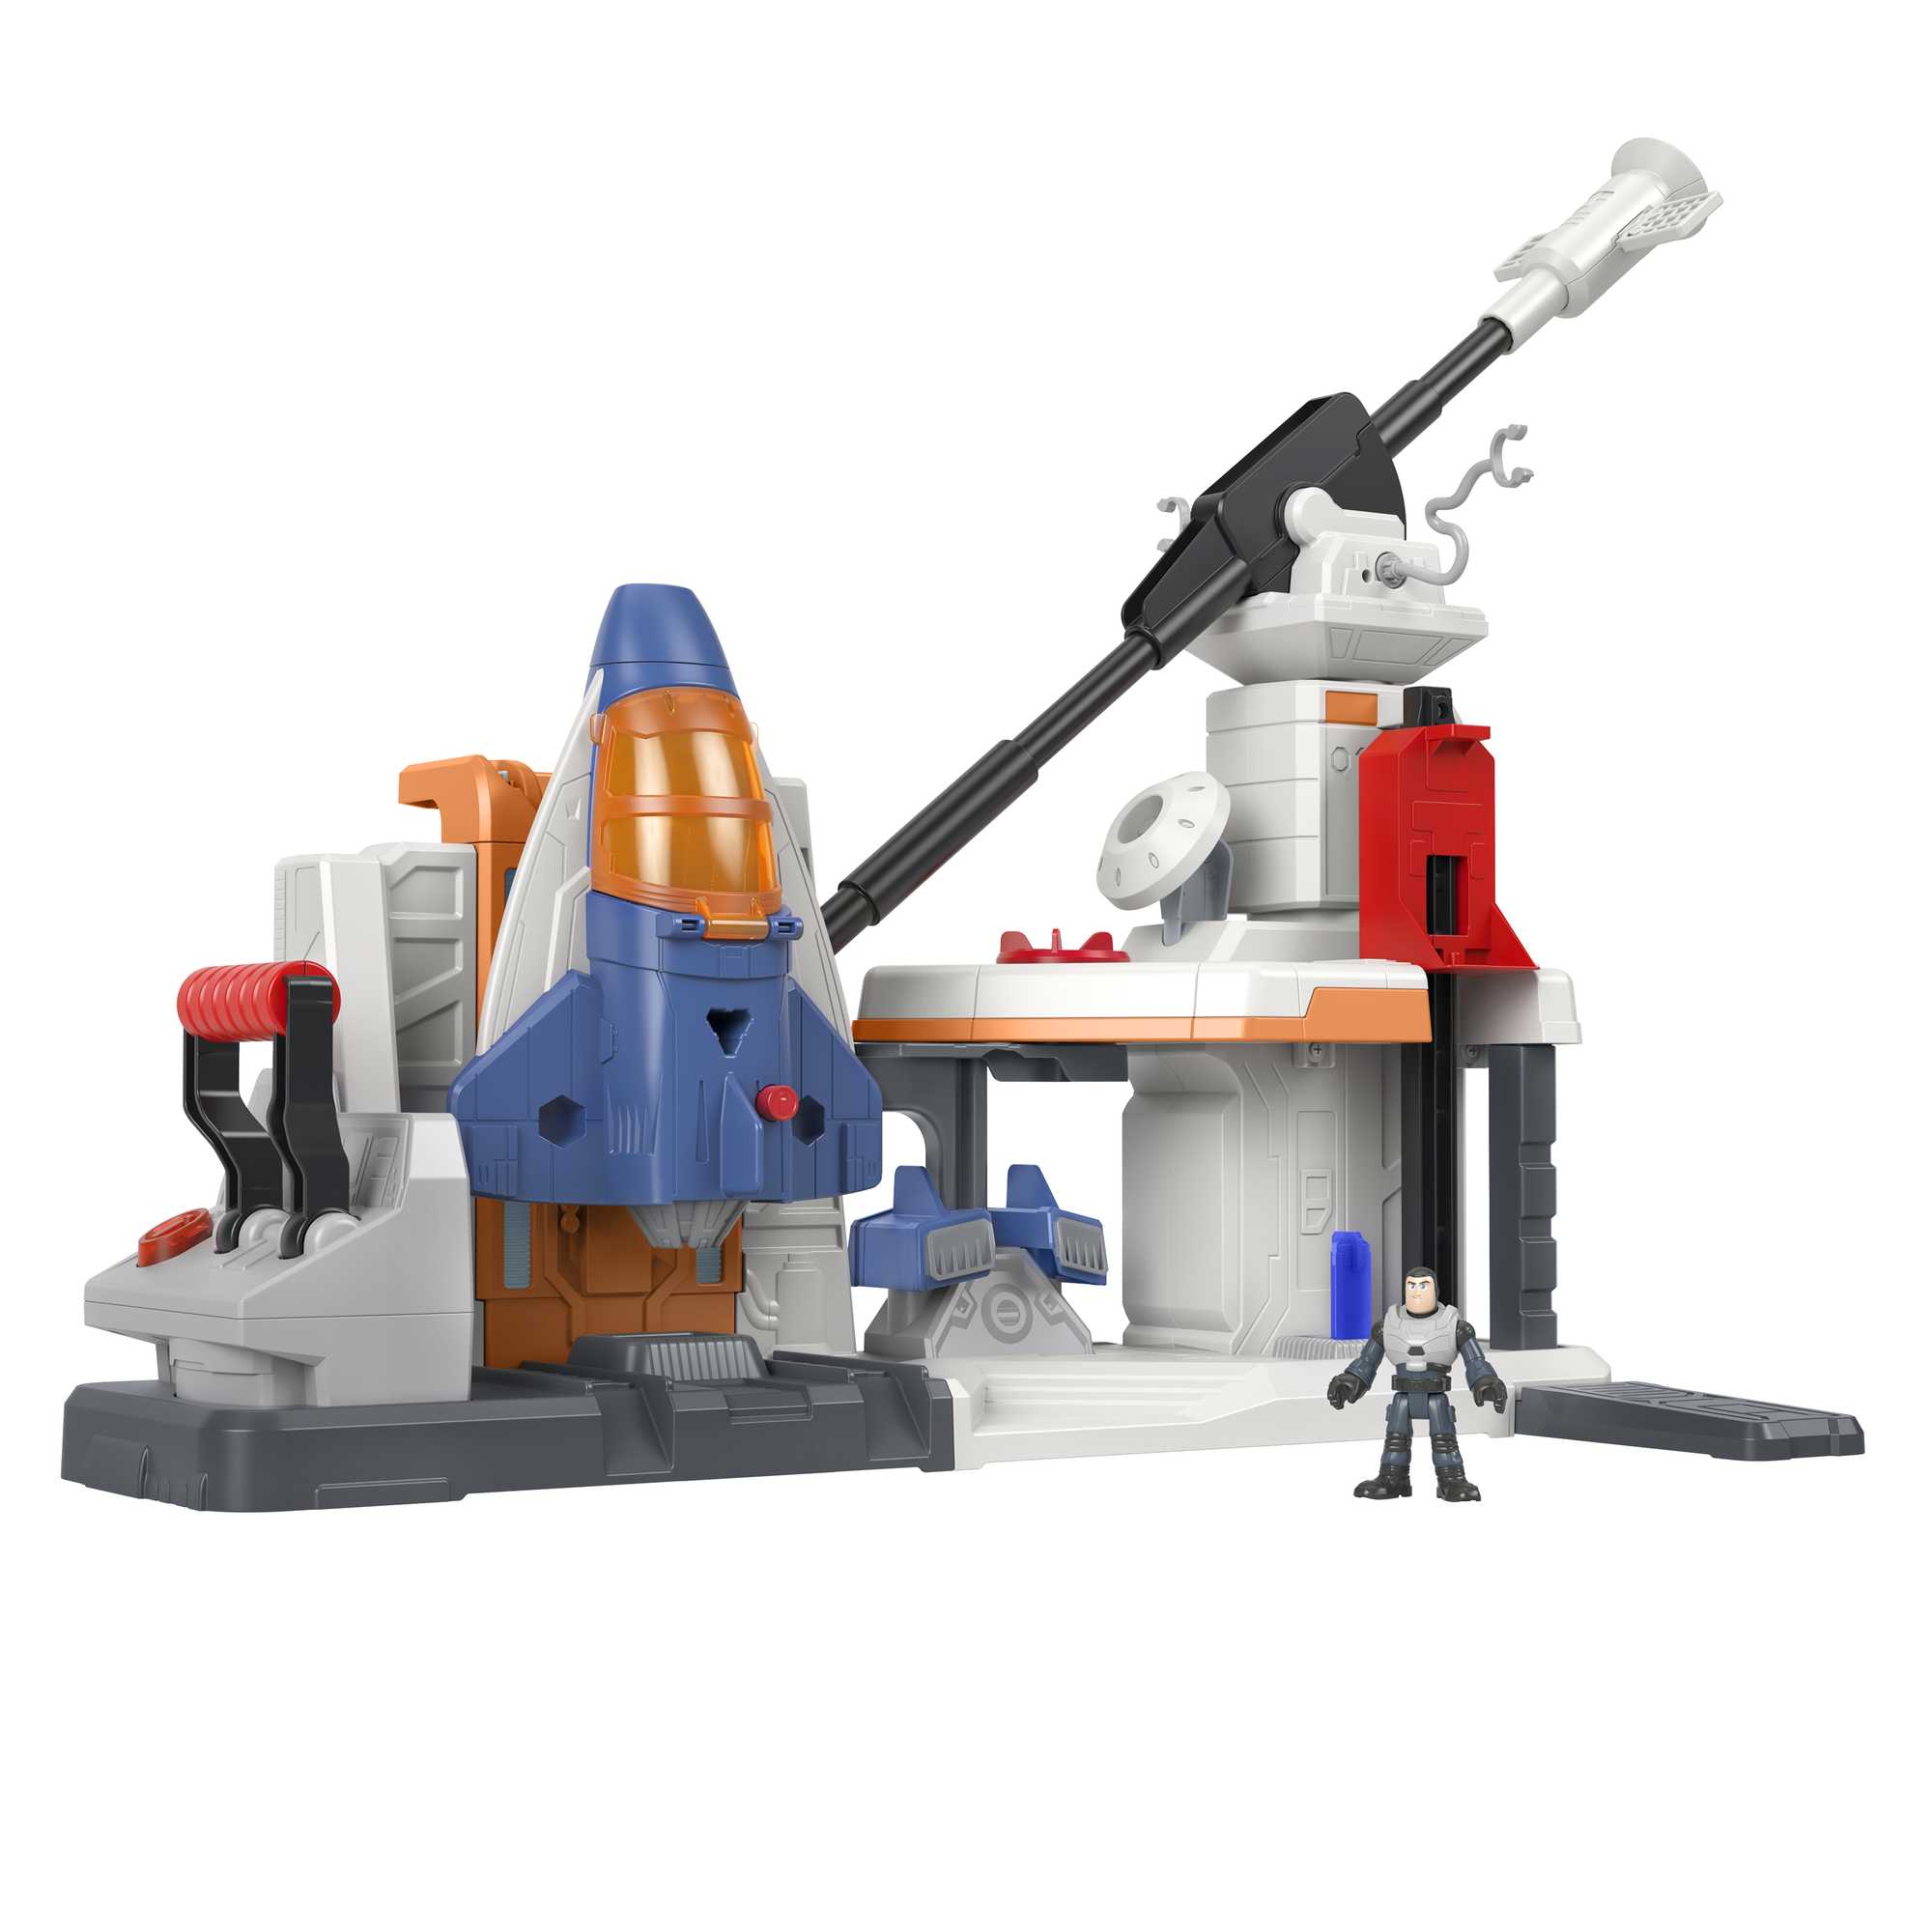 ROBert Knows, How does an ESA rocket dock with a space station?, PLAYMOBIL